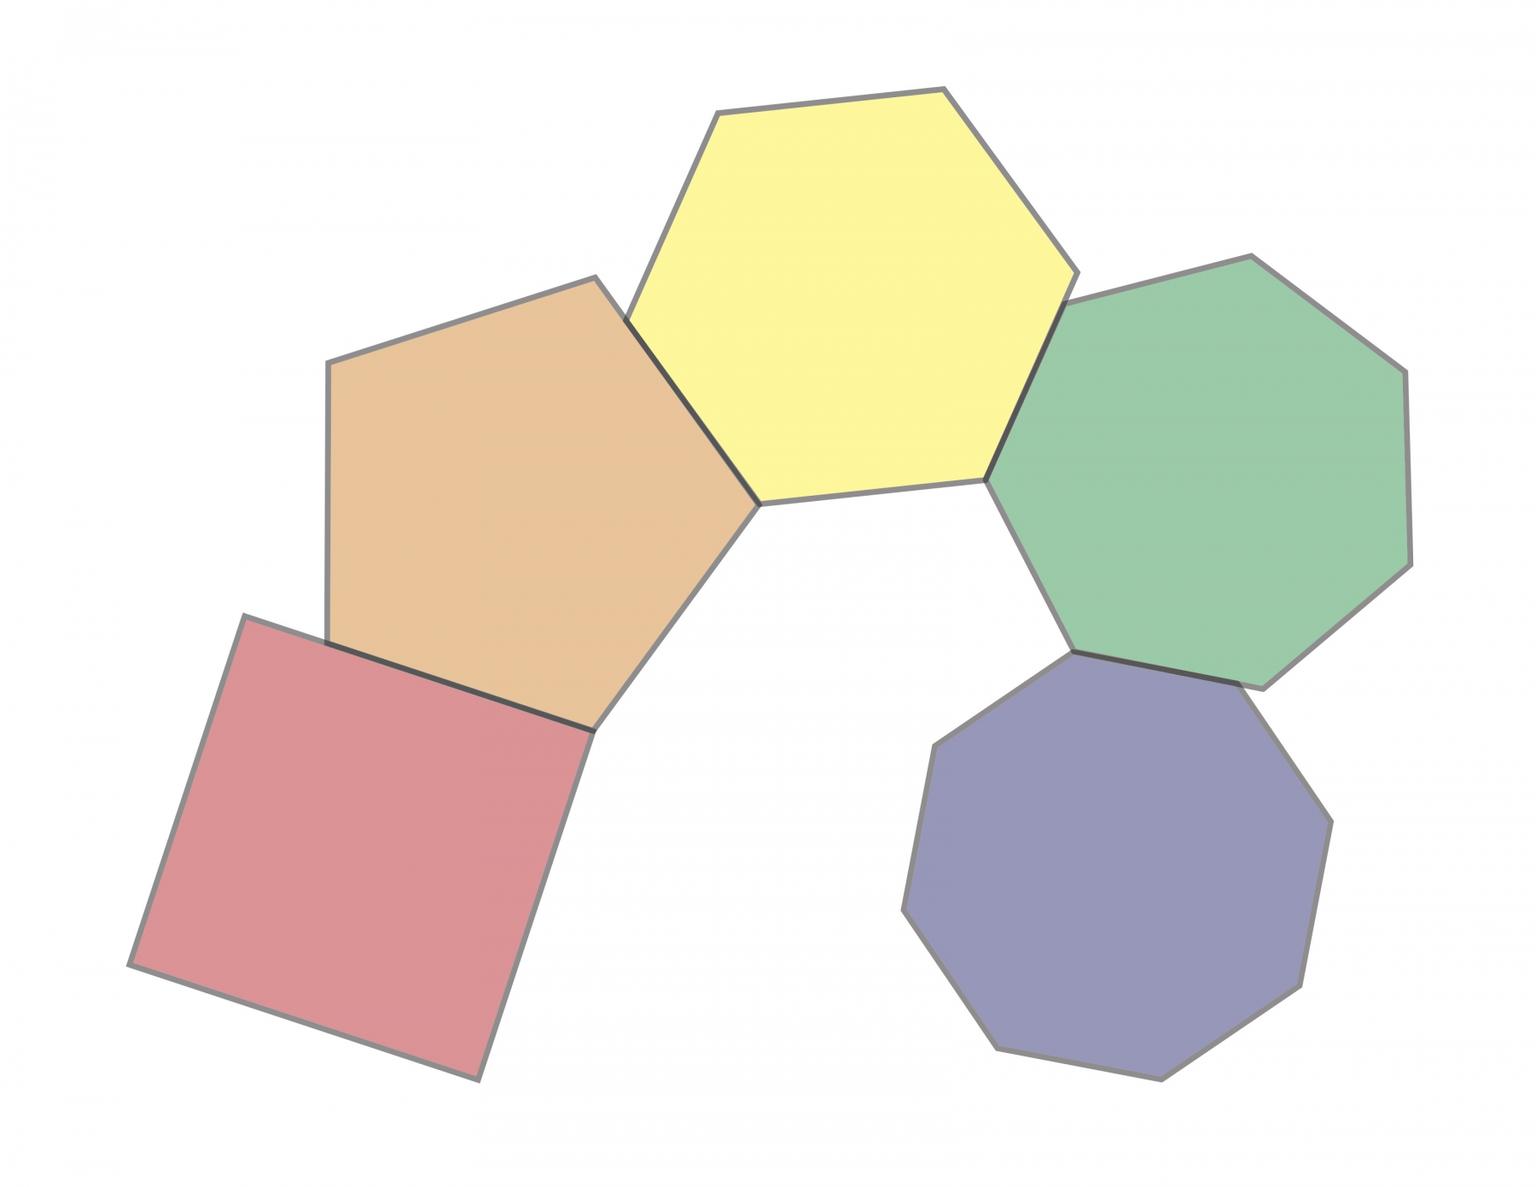 Image for entry '4 Through 8 Sided Polygons in Rainbow Colors'